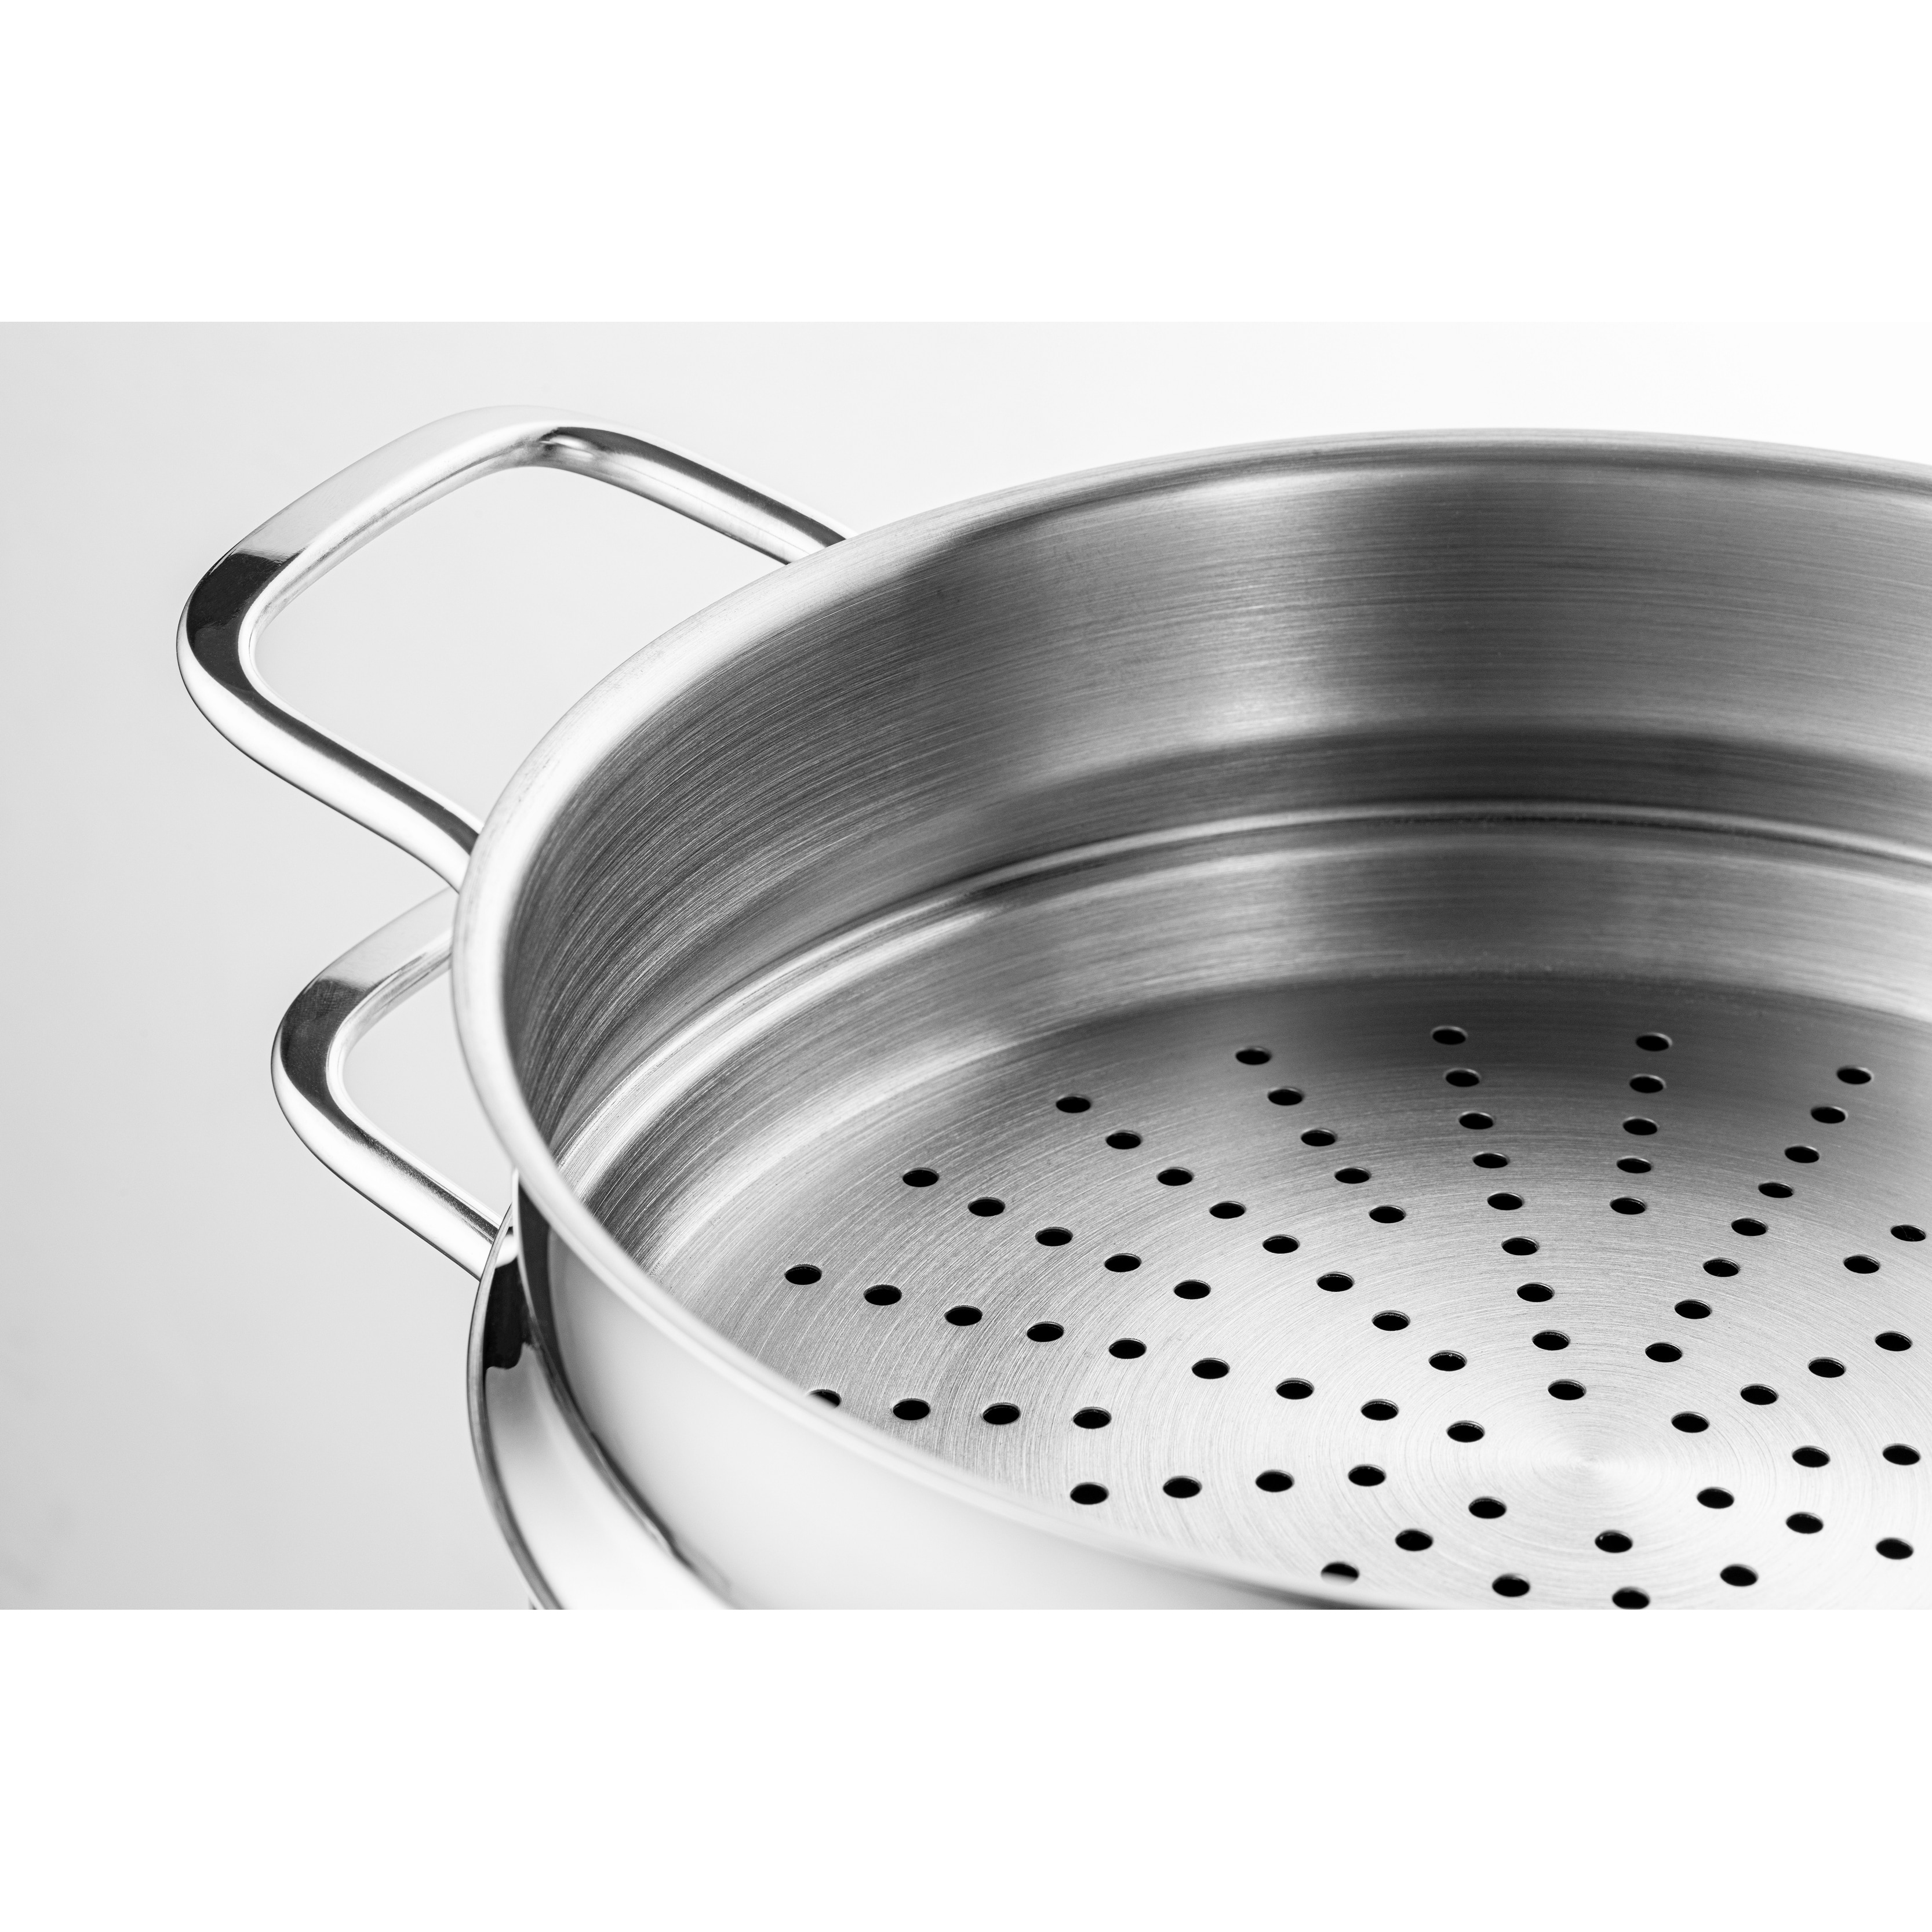 https://ak1.ostkcdn.com/images/products/is/images/direct/5980bcbd57dbf33e01bbf4250233687df06116e3/Prime-Cook-6.4-qt.-Stainless-Steel-Steamer-Pot-with-Lid.jpg